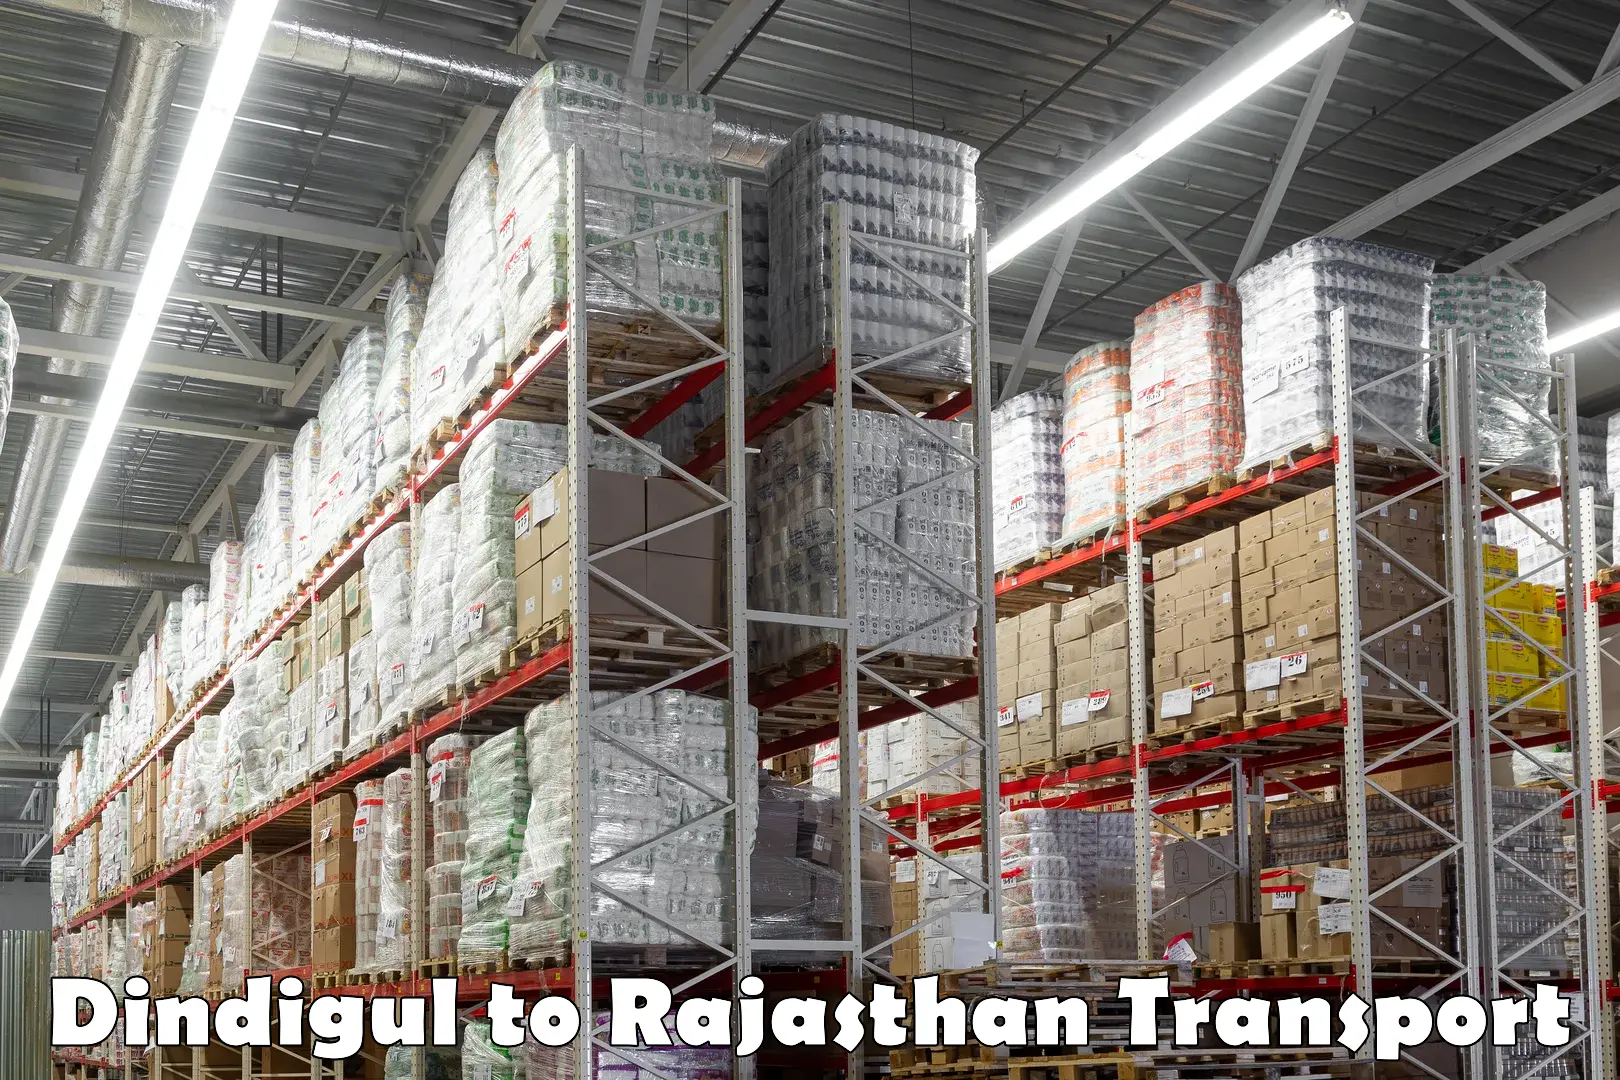 Daily parcel service transport Dindigul to Rajasthan